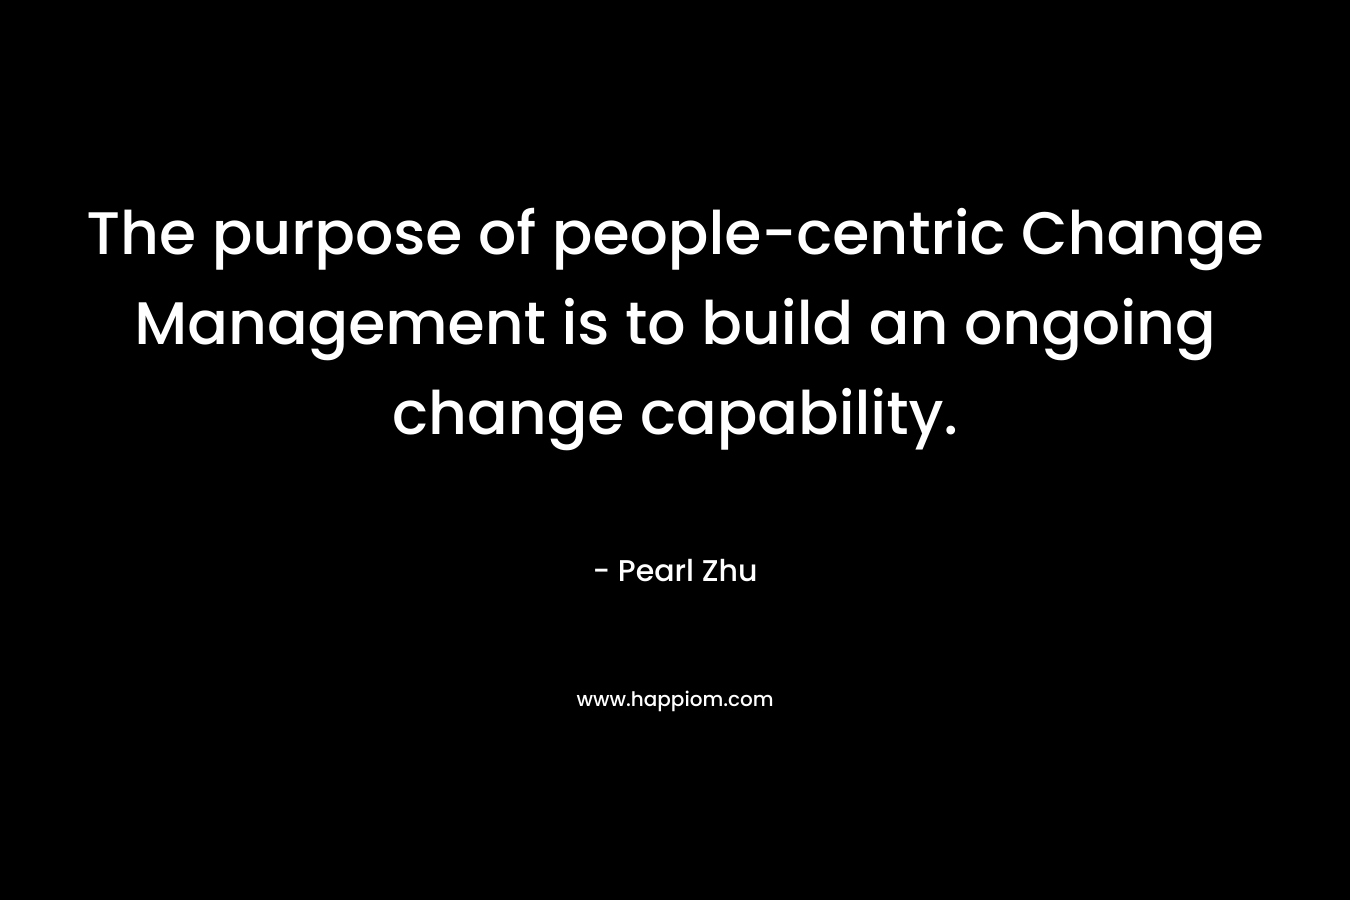 The purpose of people-centric Change Management is to build an ongoing change capability. – Pearl Zhu